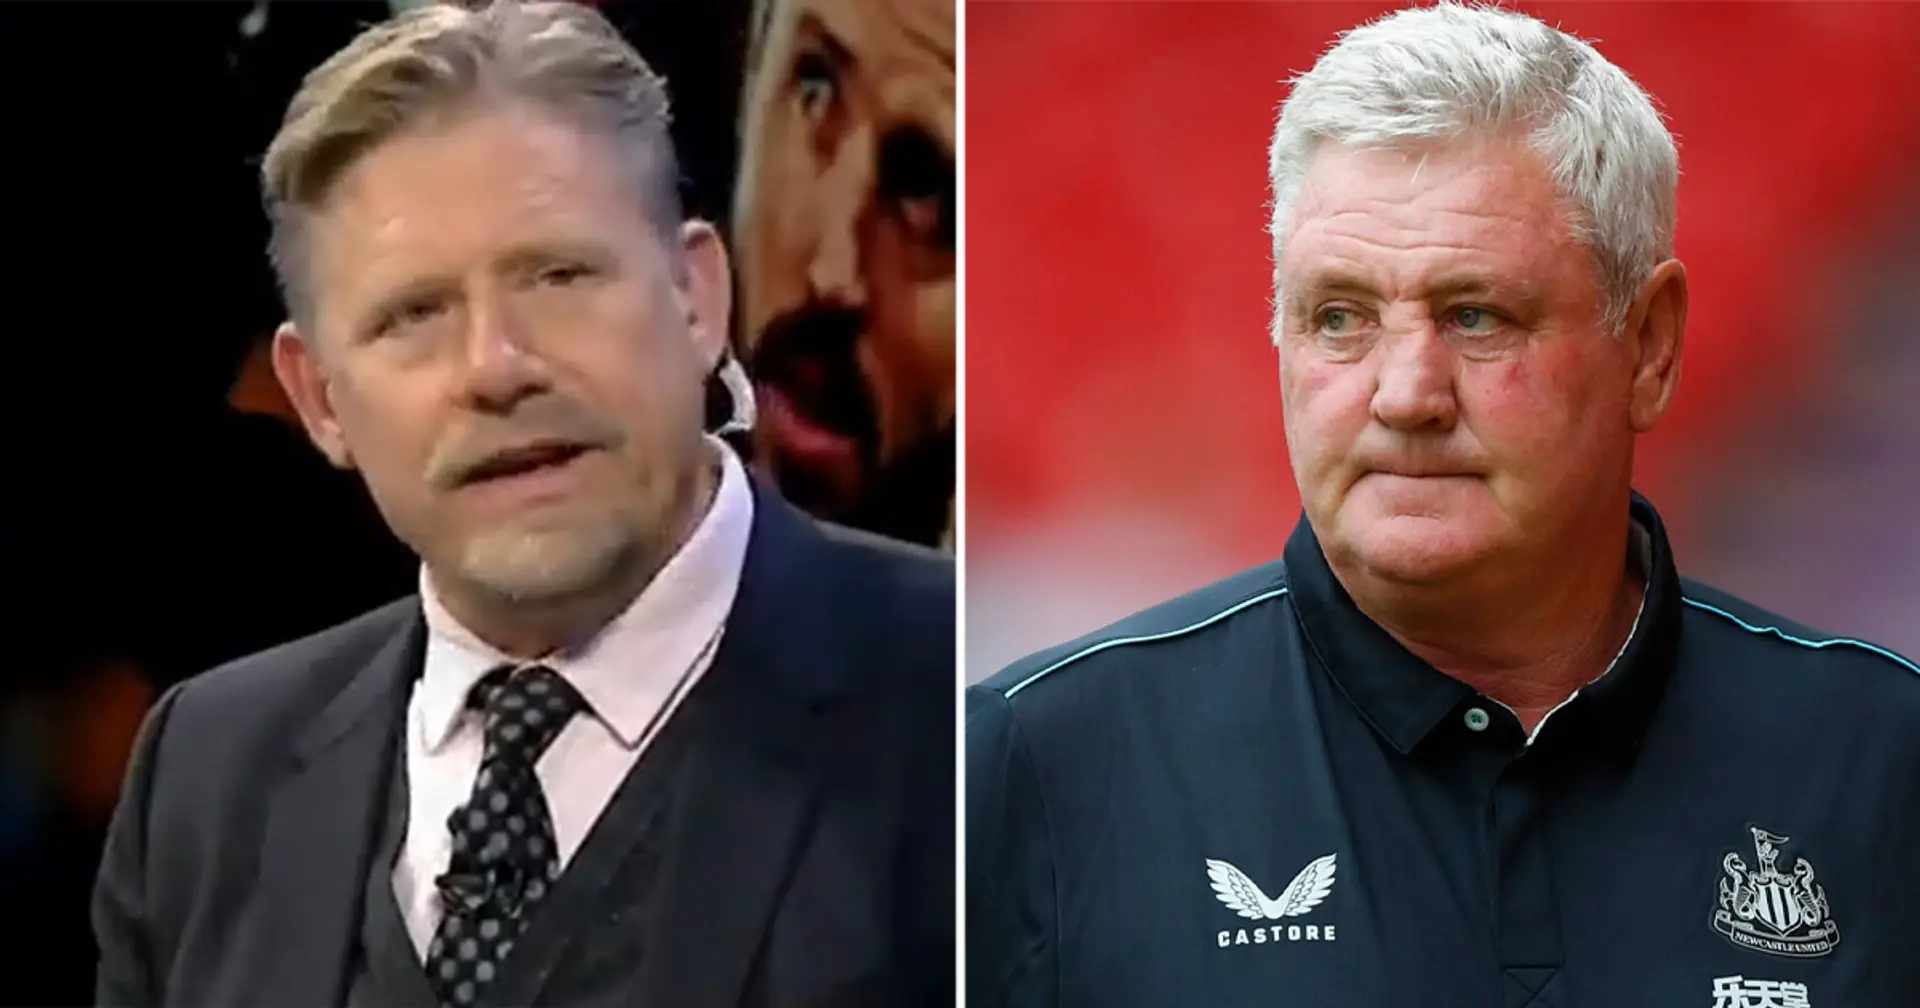 Peter Schmeichel claims Steve Bruce would be 'fantastic' interim boss for Man United